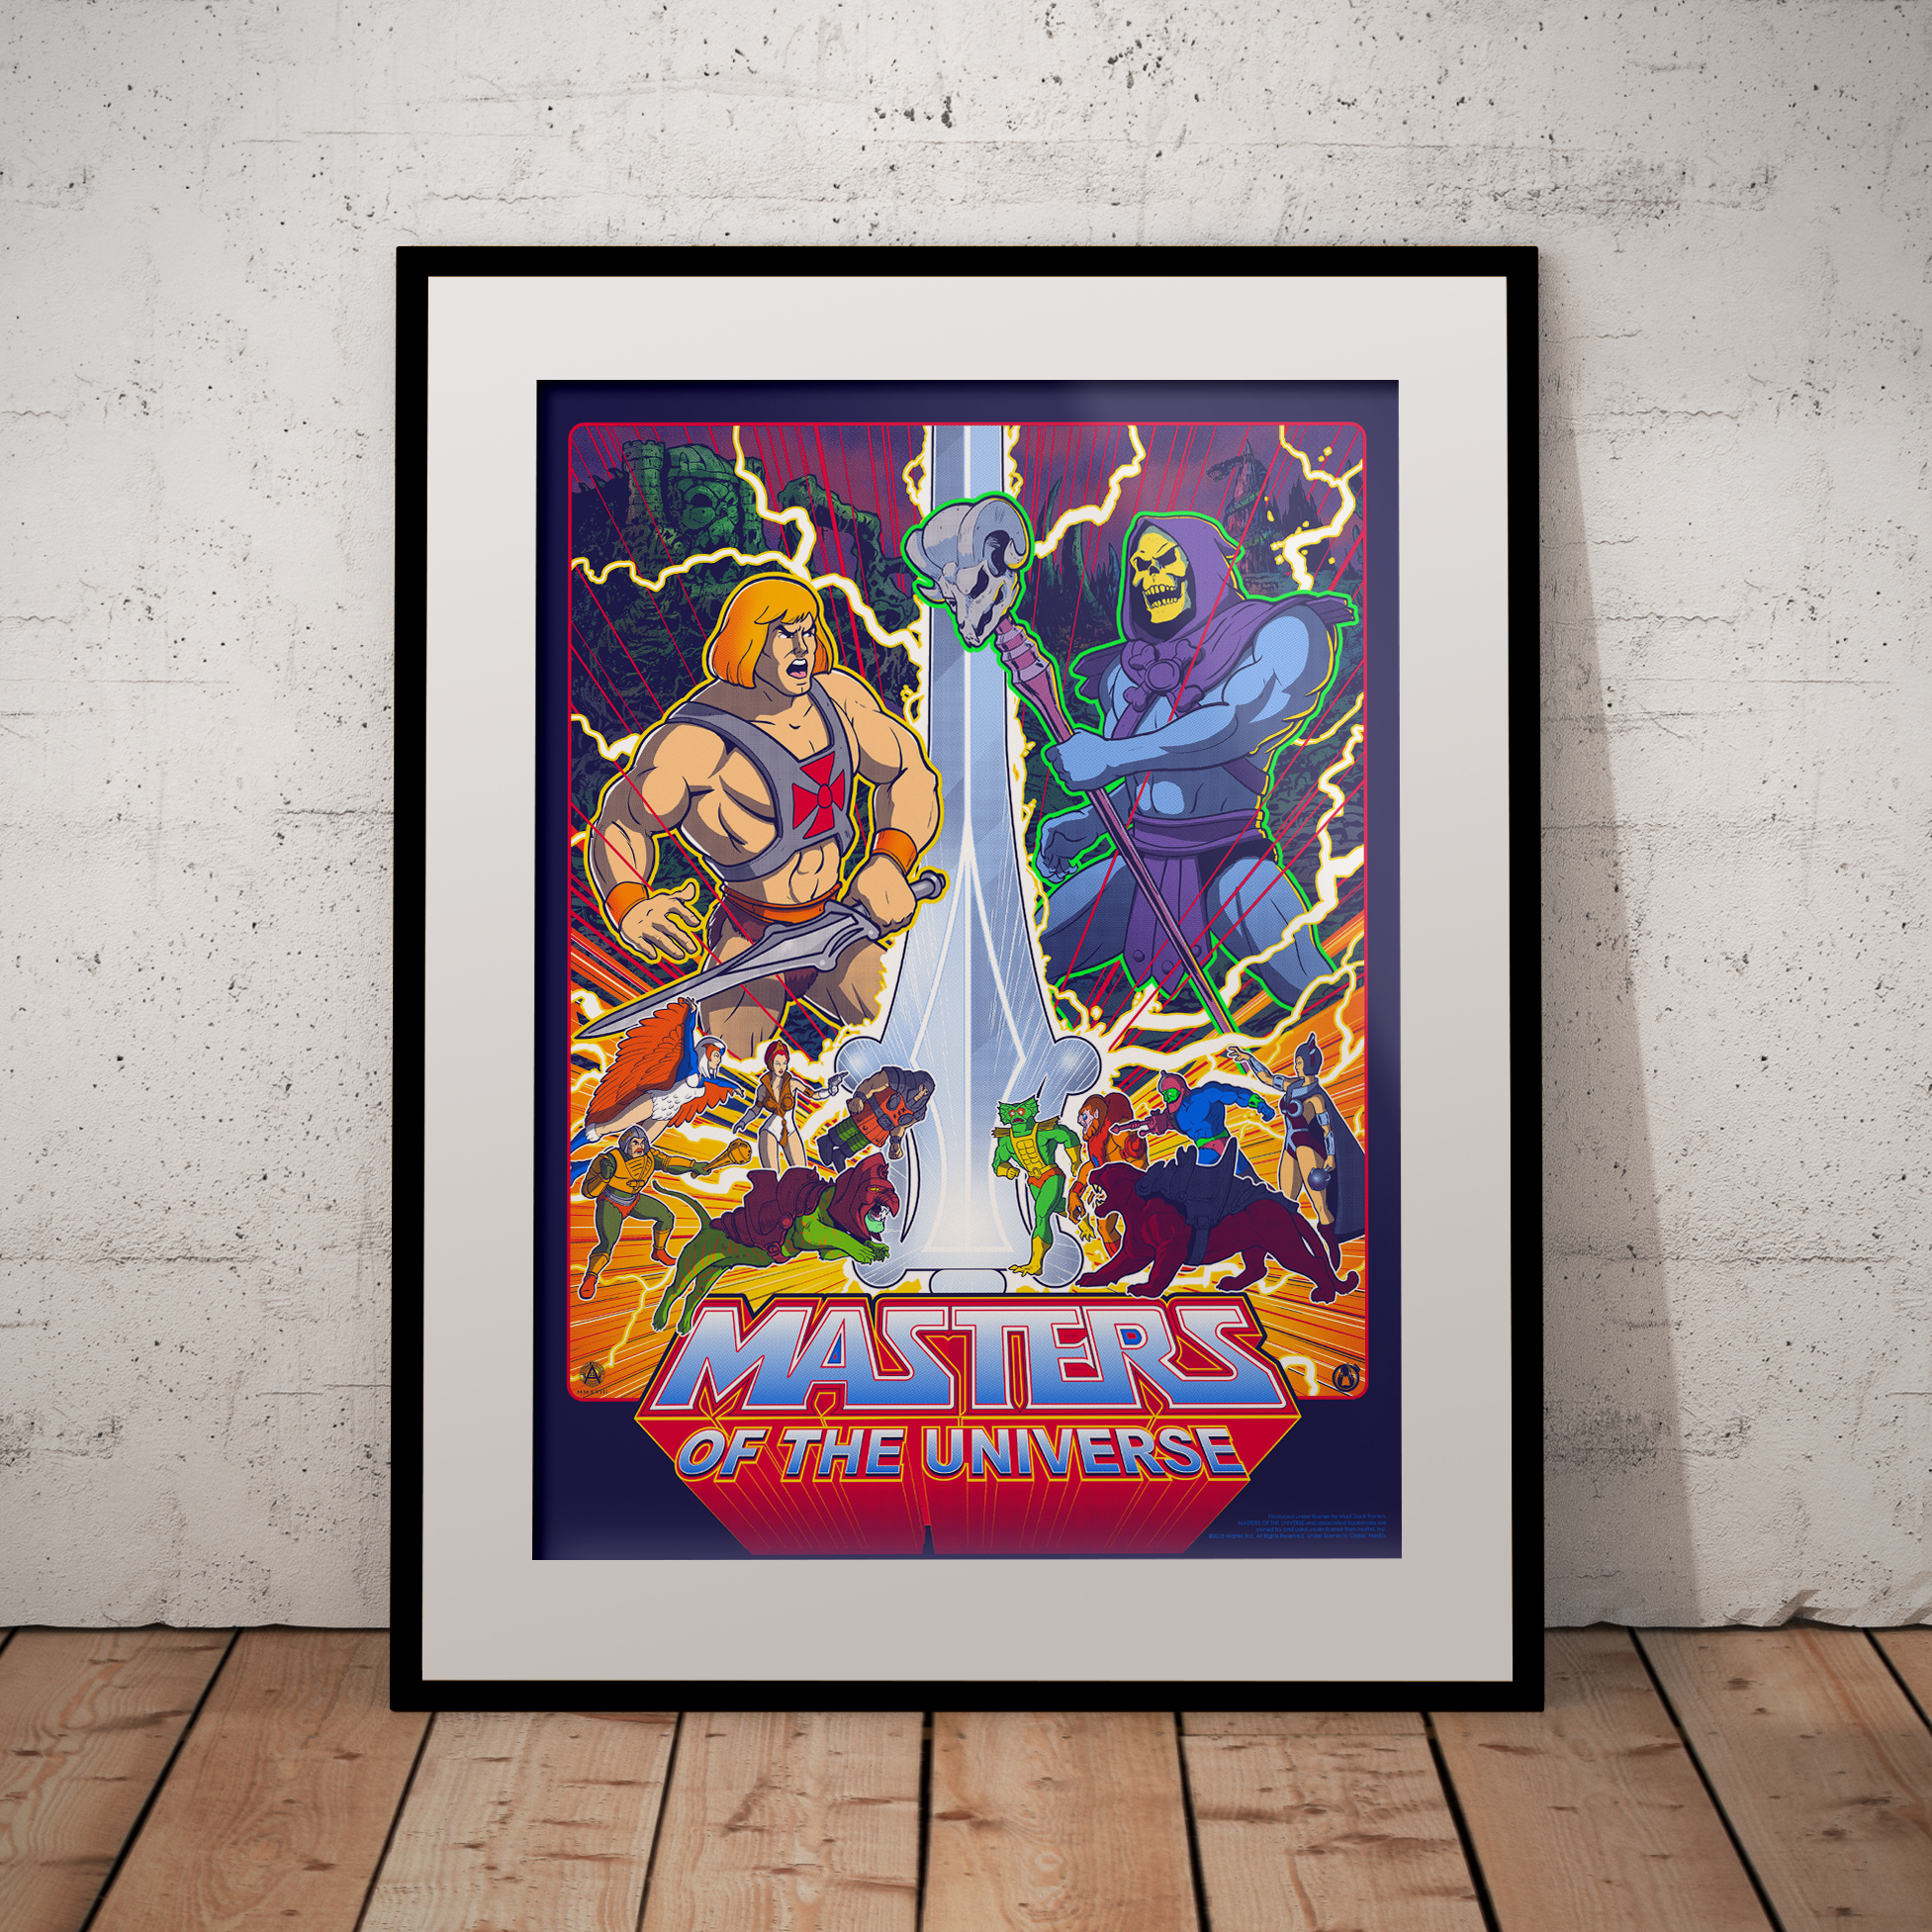 The Masters Of The Universe - Regular Colorway